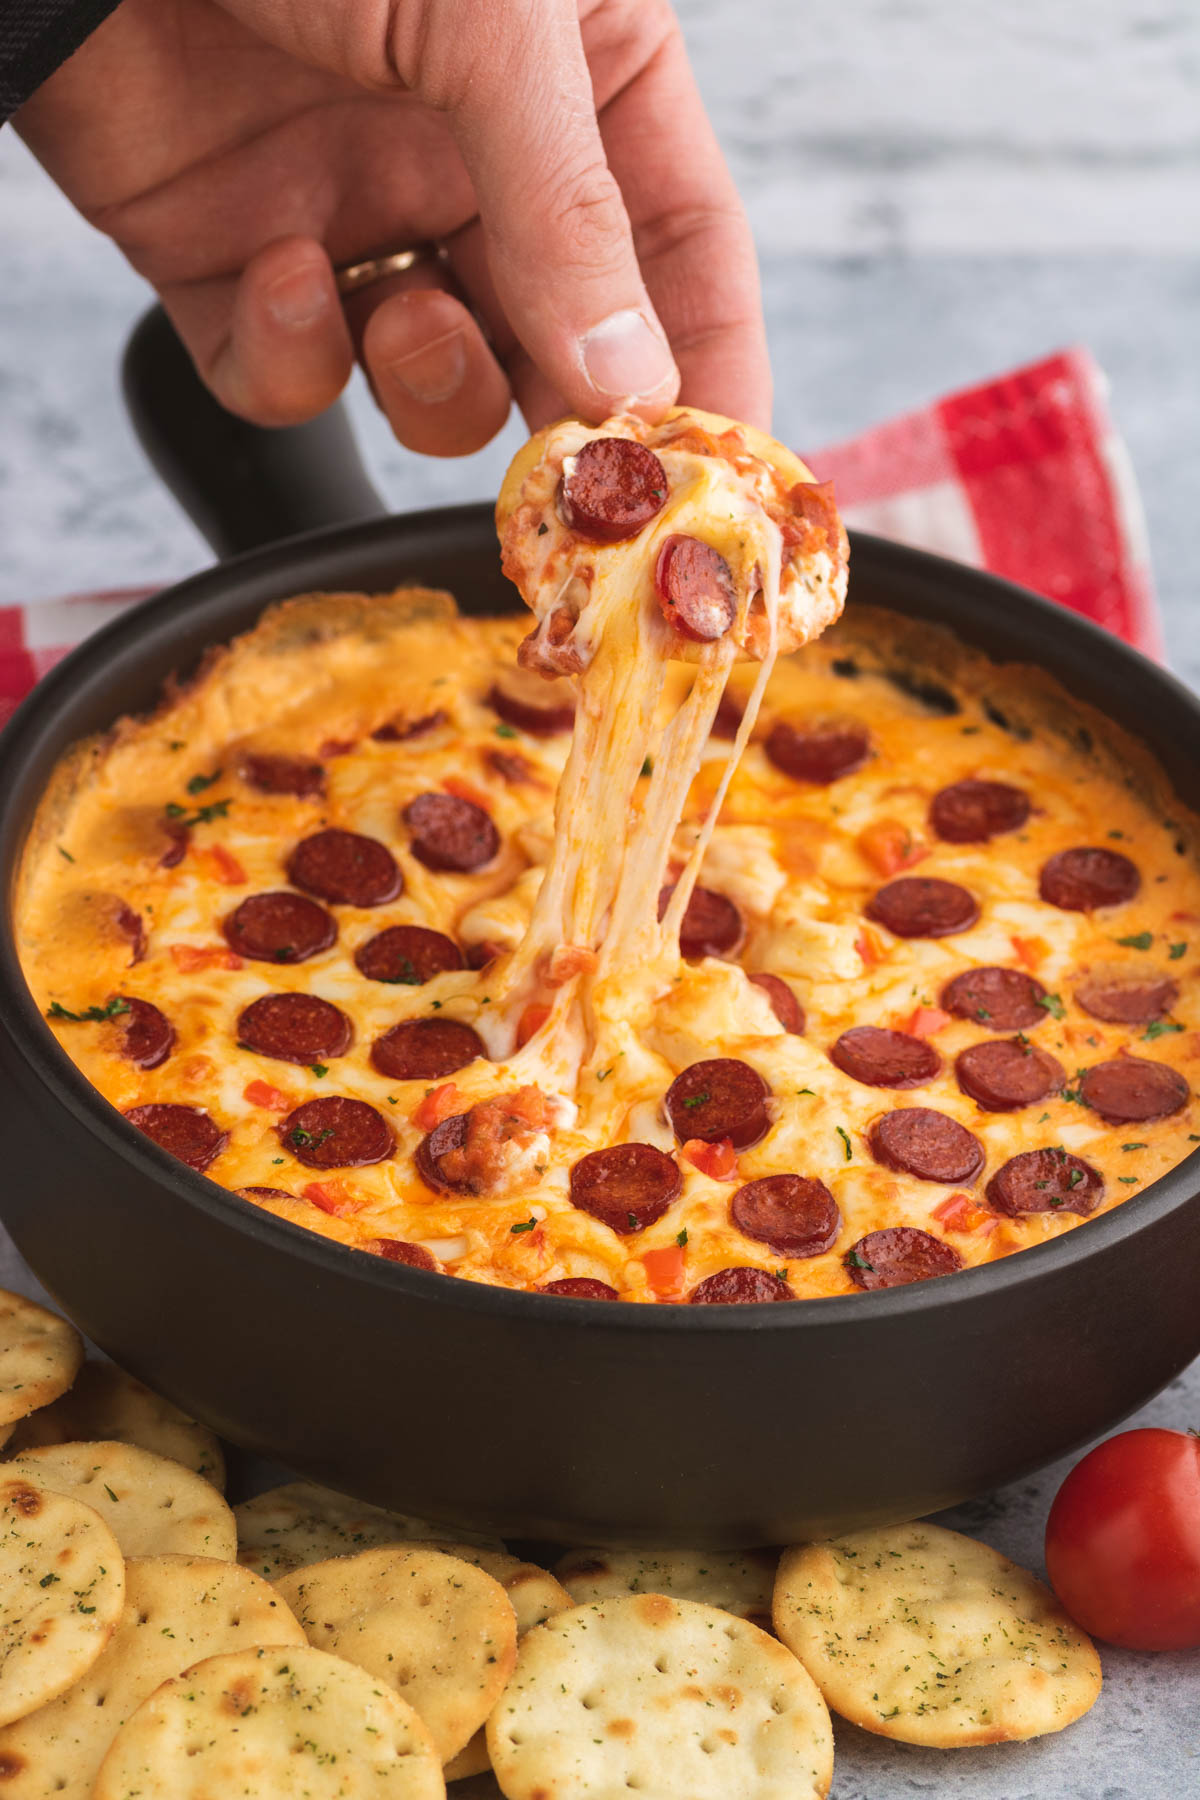 A hand dips a cracker into hot bubbly pizza dip, leaving a trail of melted cheese.